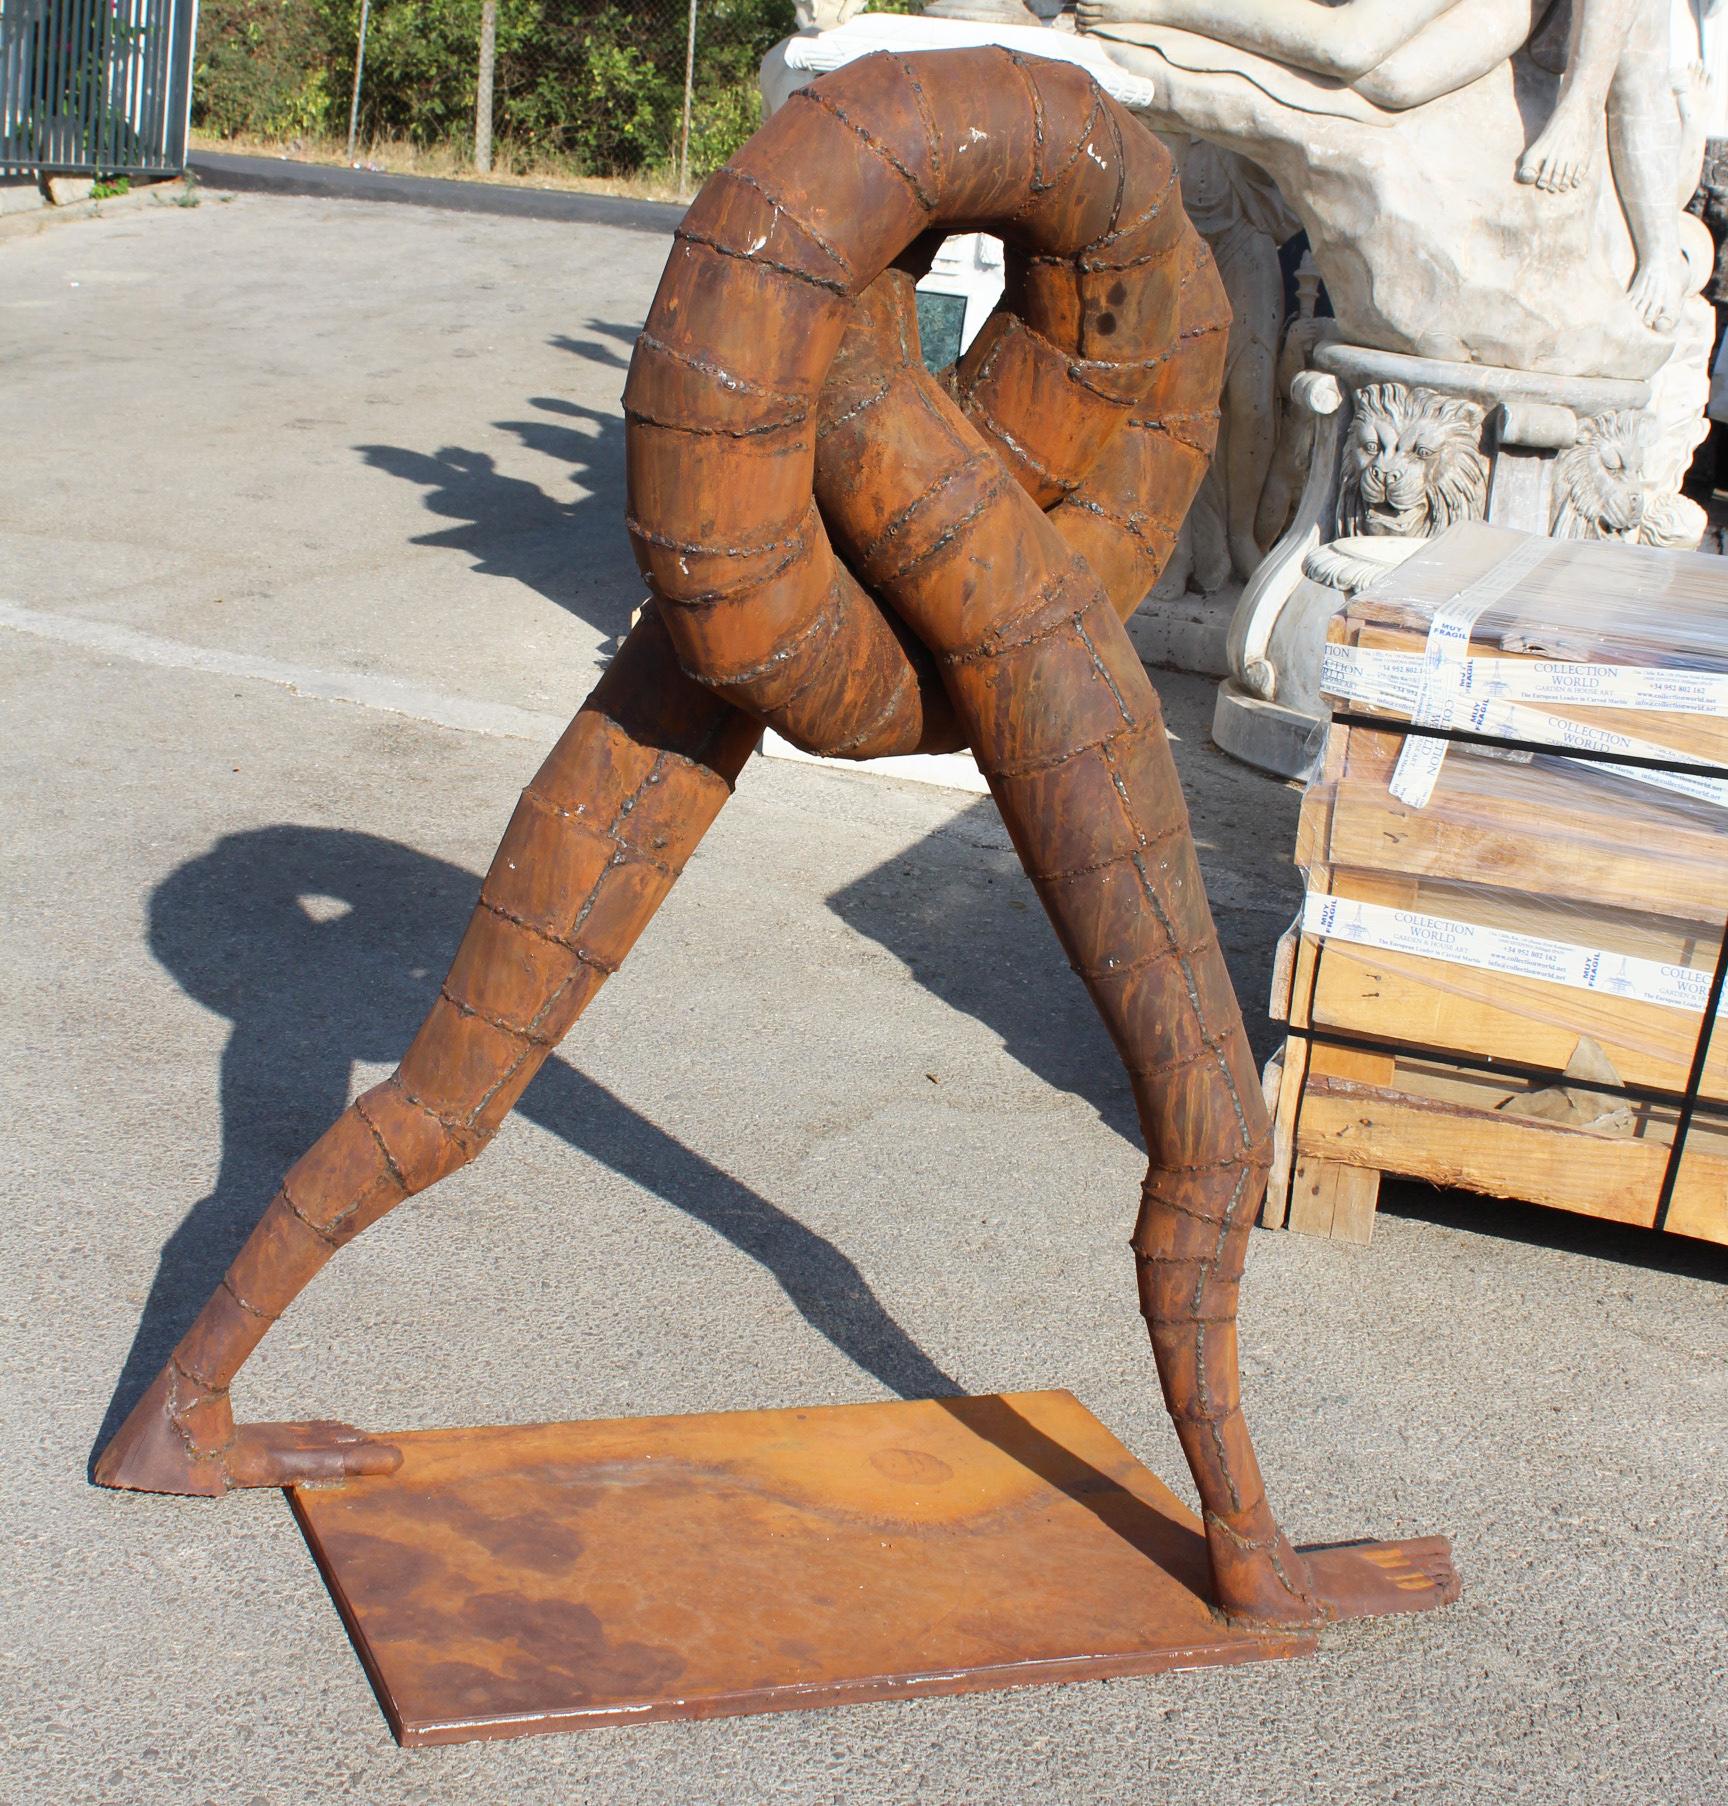 Surrealist iron sculpture where intertwined legs form the body.